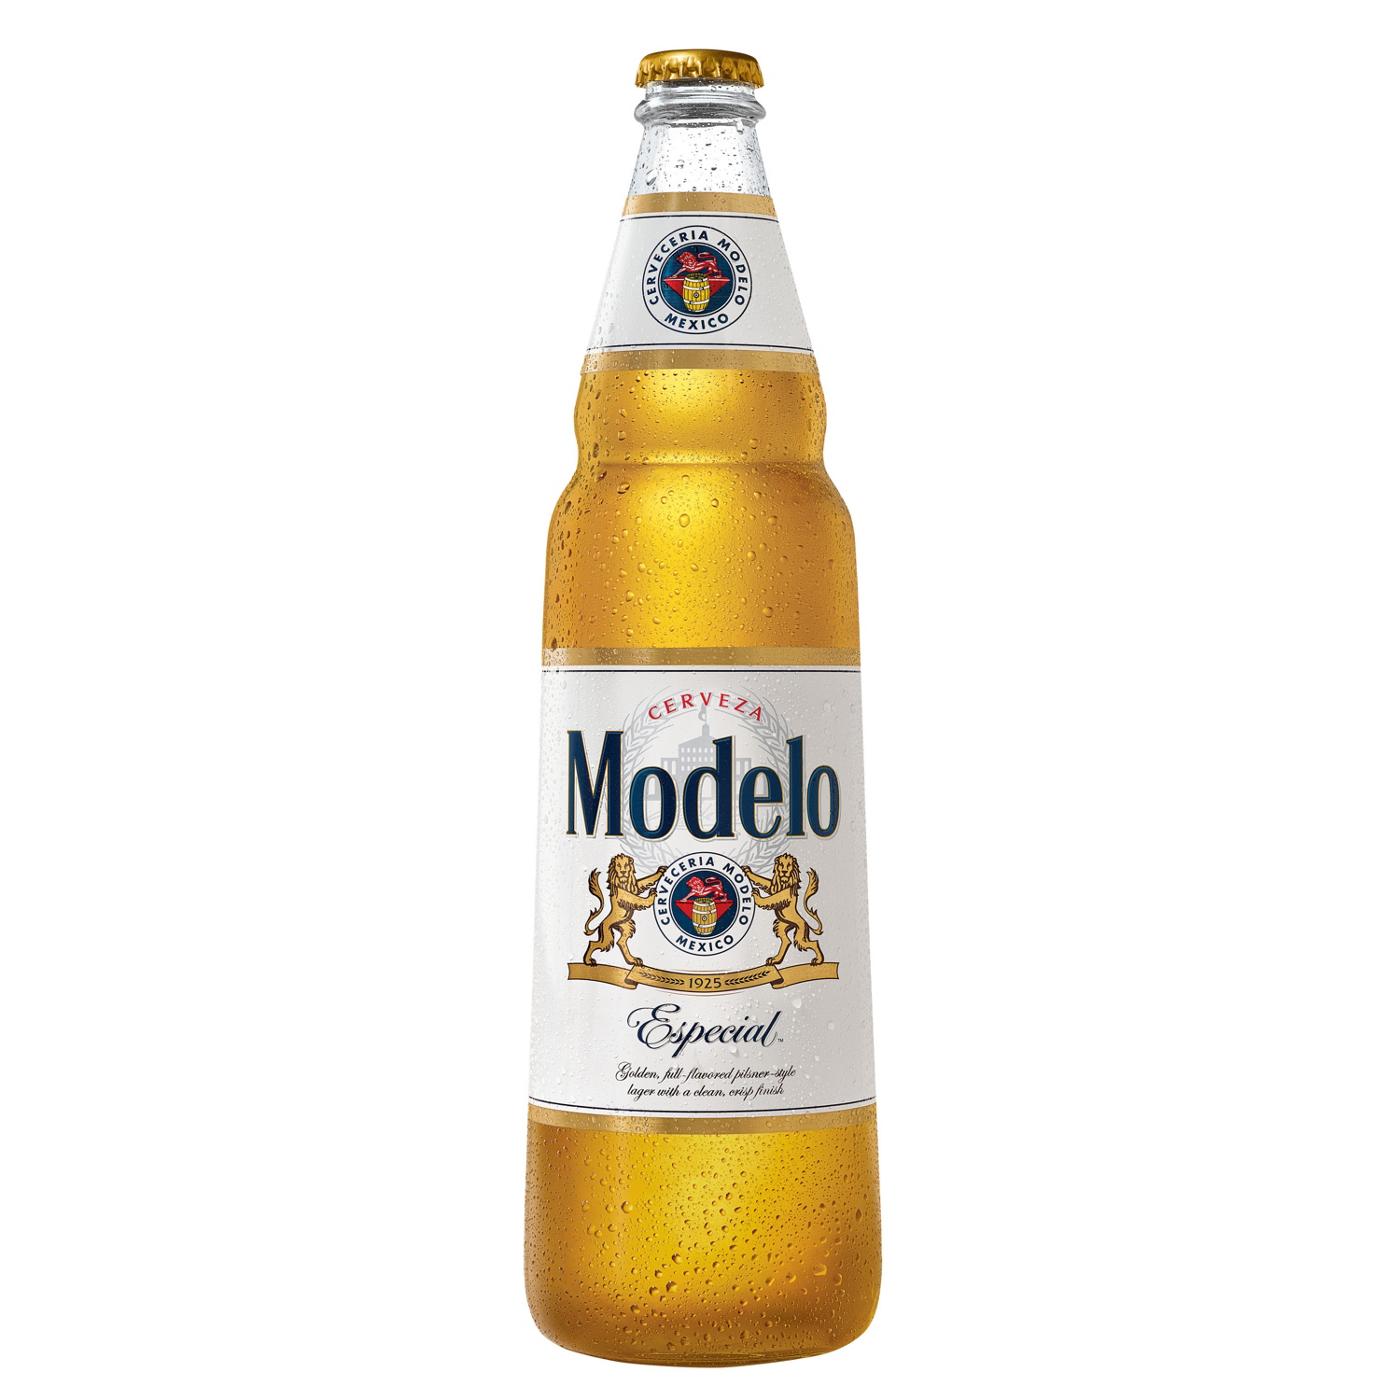 Modelo Especial Mexican Lager Import Beer 24 oz Bottle; image 1 of 2